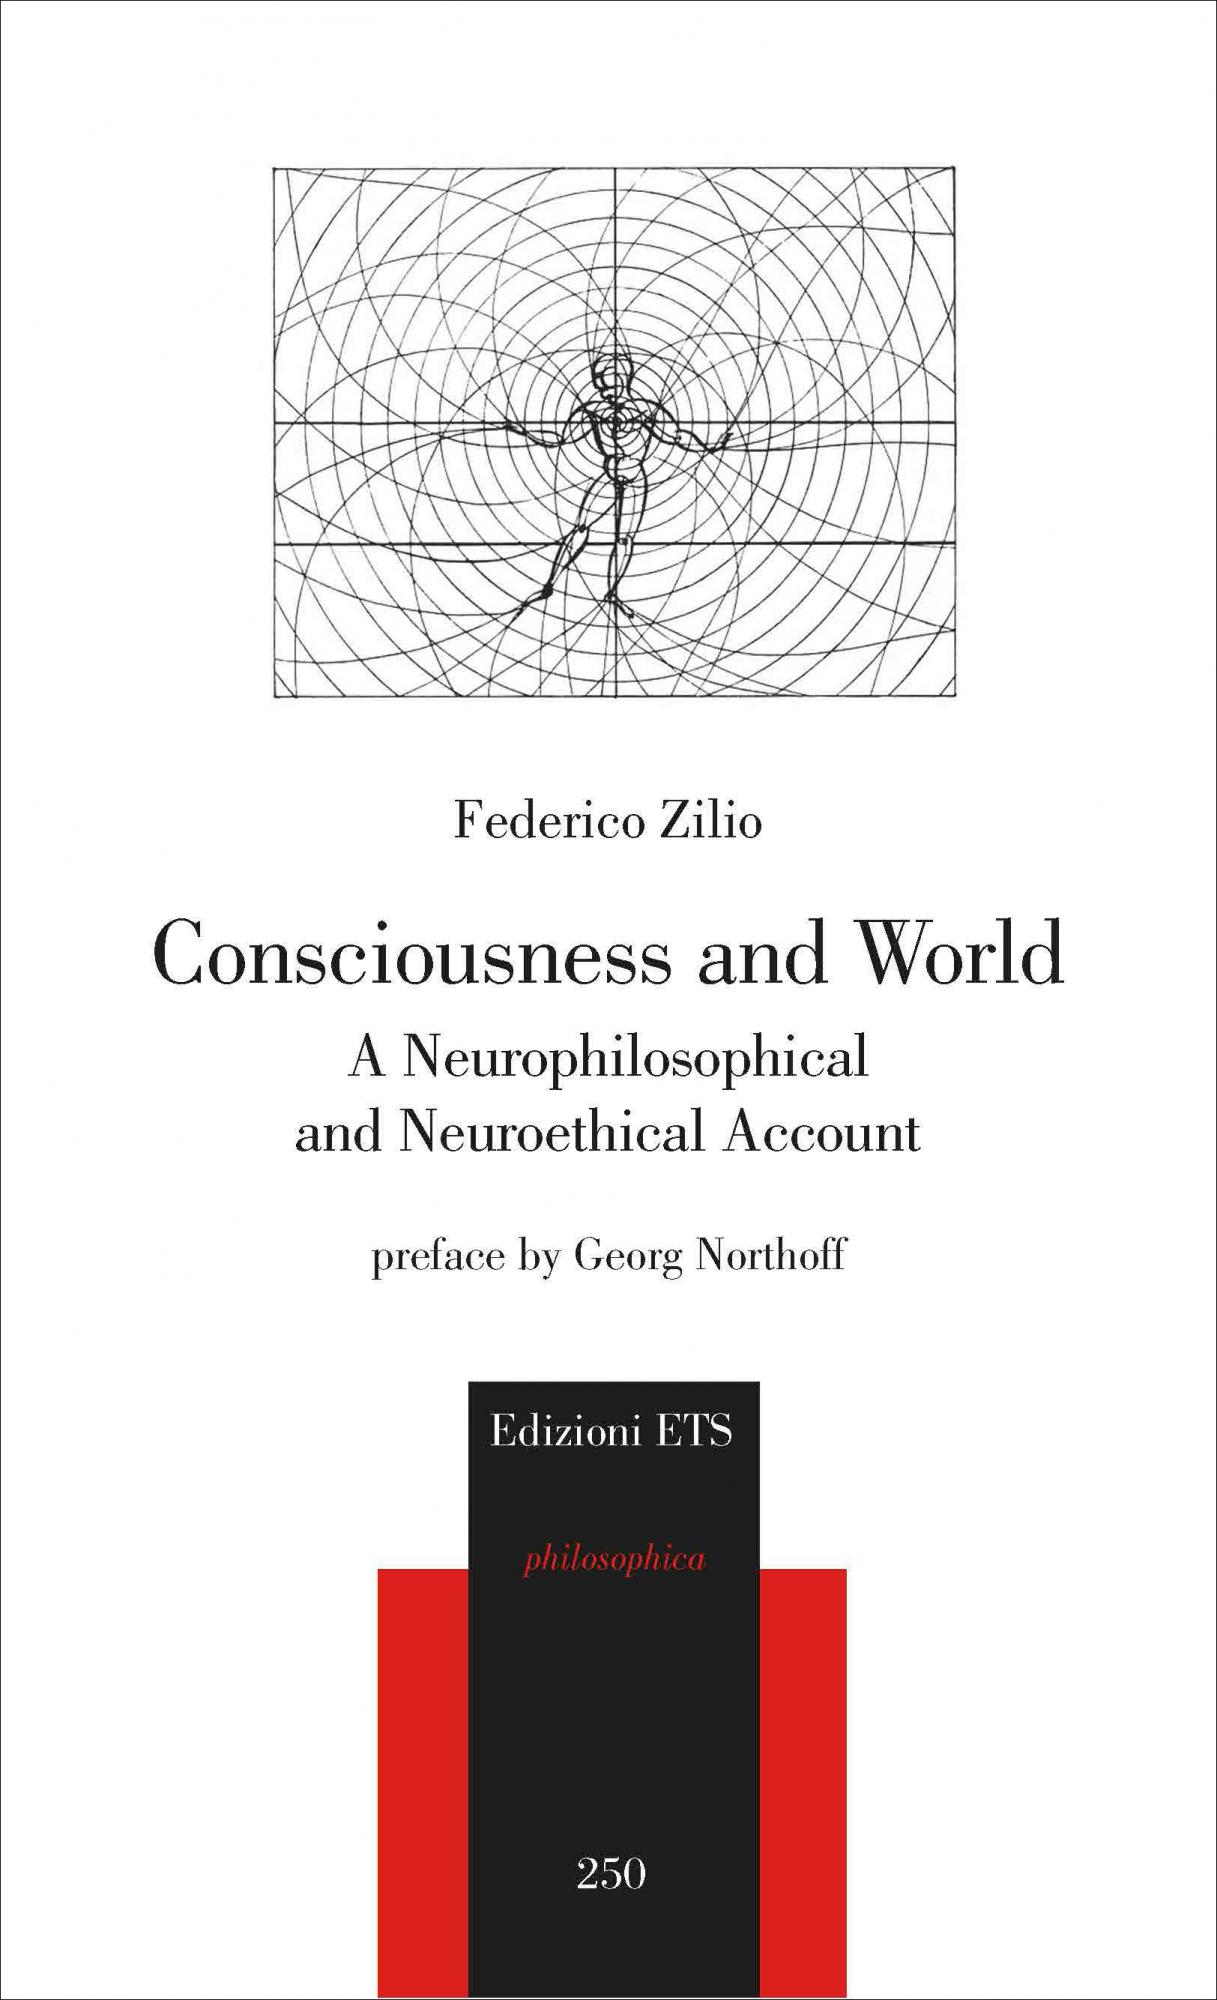 Consciousness and World.A Neurophilosophical and Neuroethical Account